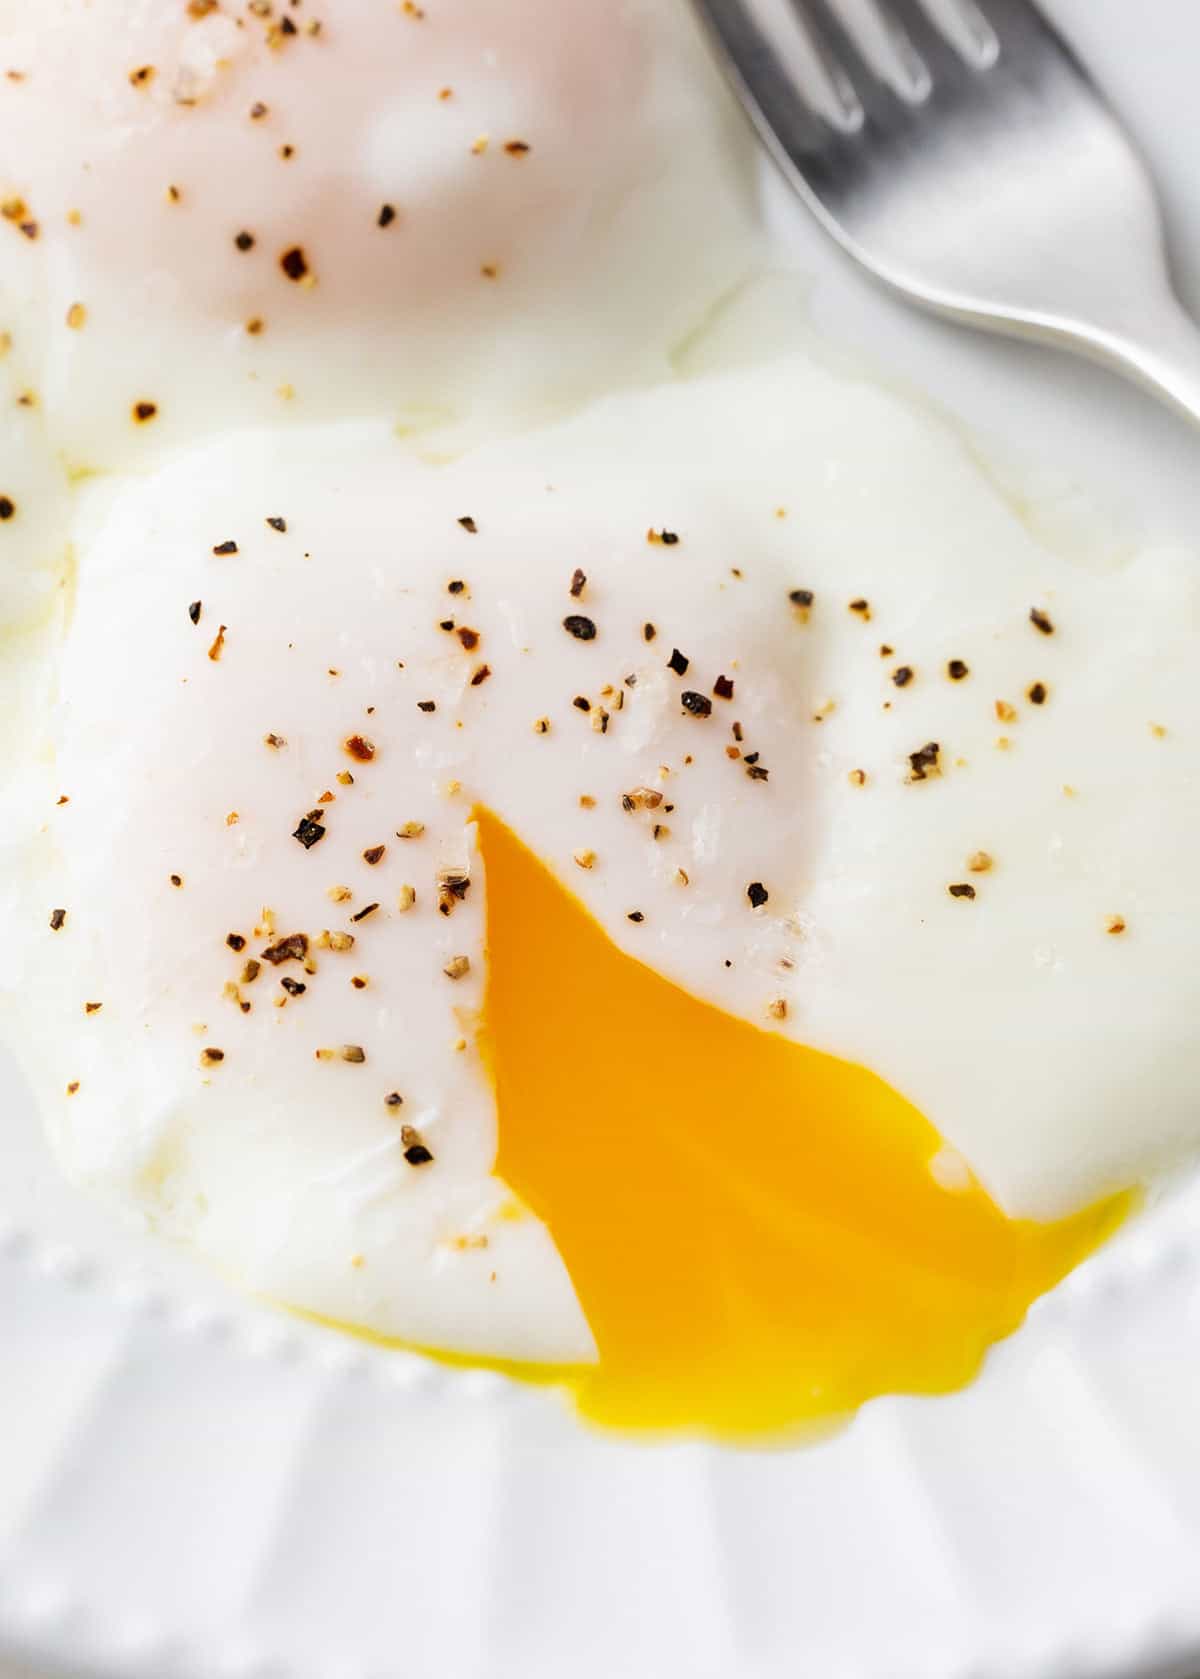 Poached eggs on a plate.